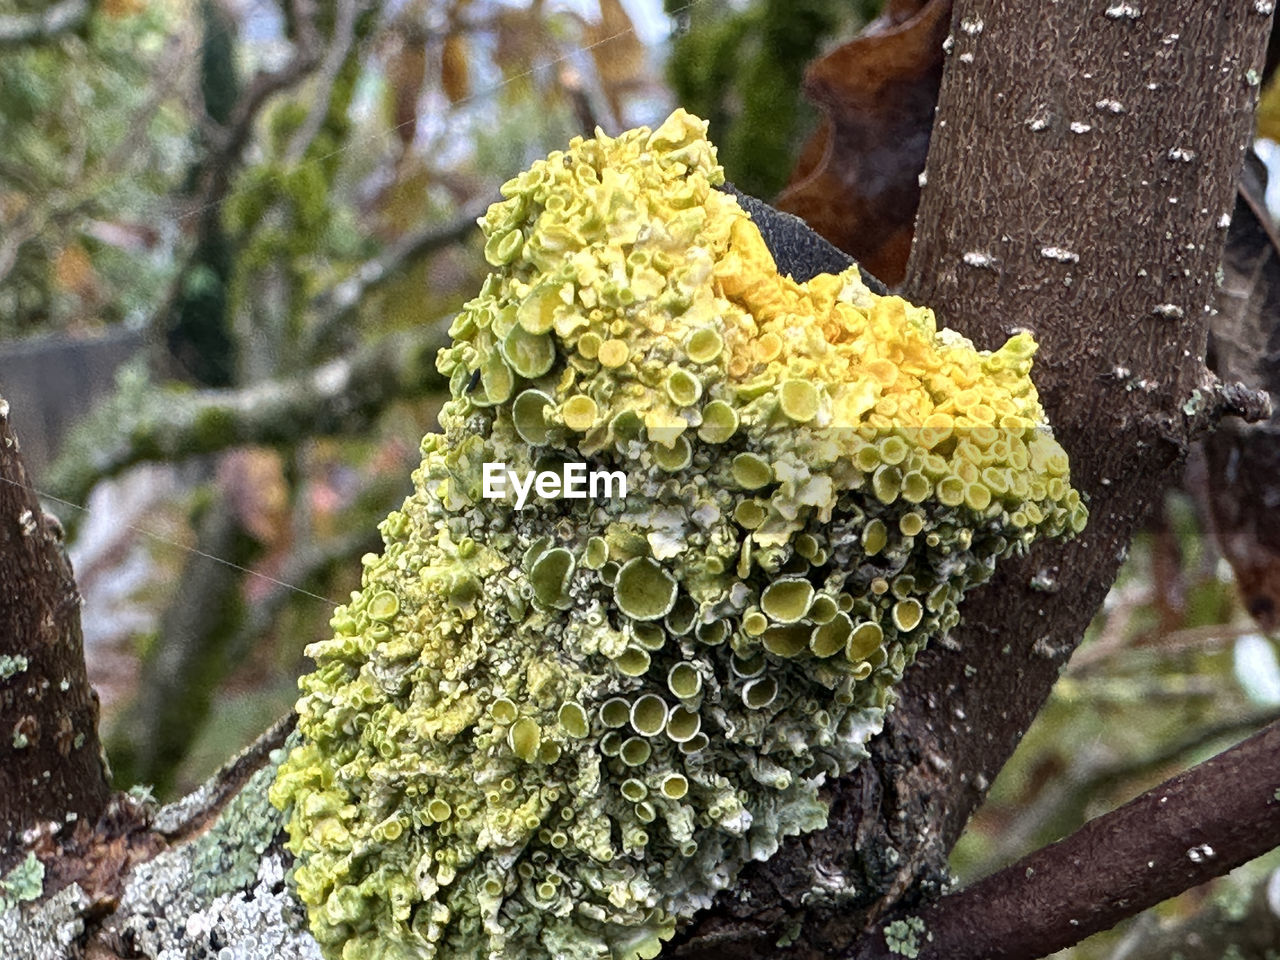 tree, plant, leaf, nature, growth, flower, branch, focus on foreground, day, close-up, no people, yellow, beauty in nature, autumn, trunk, lichen, tree trunk, green, outdoors, shrub, fungus, moss, spring, winter, produce, cold temperature